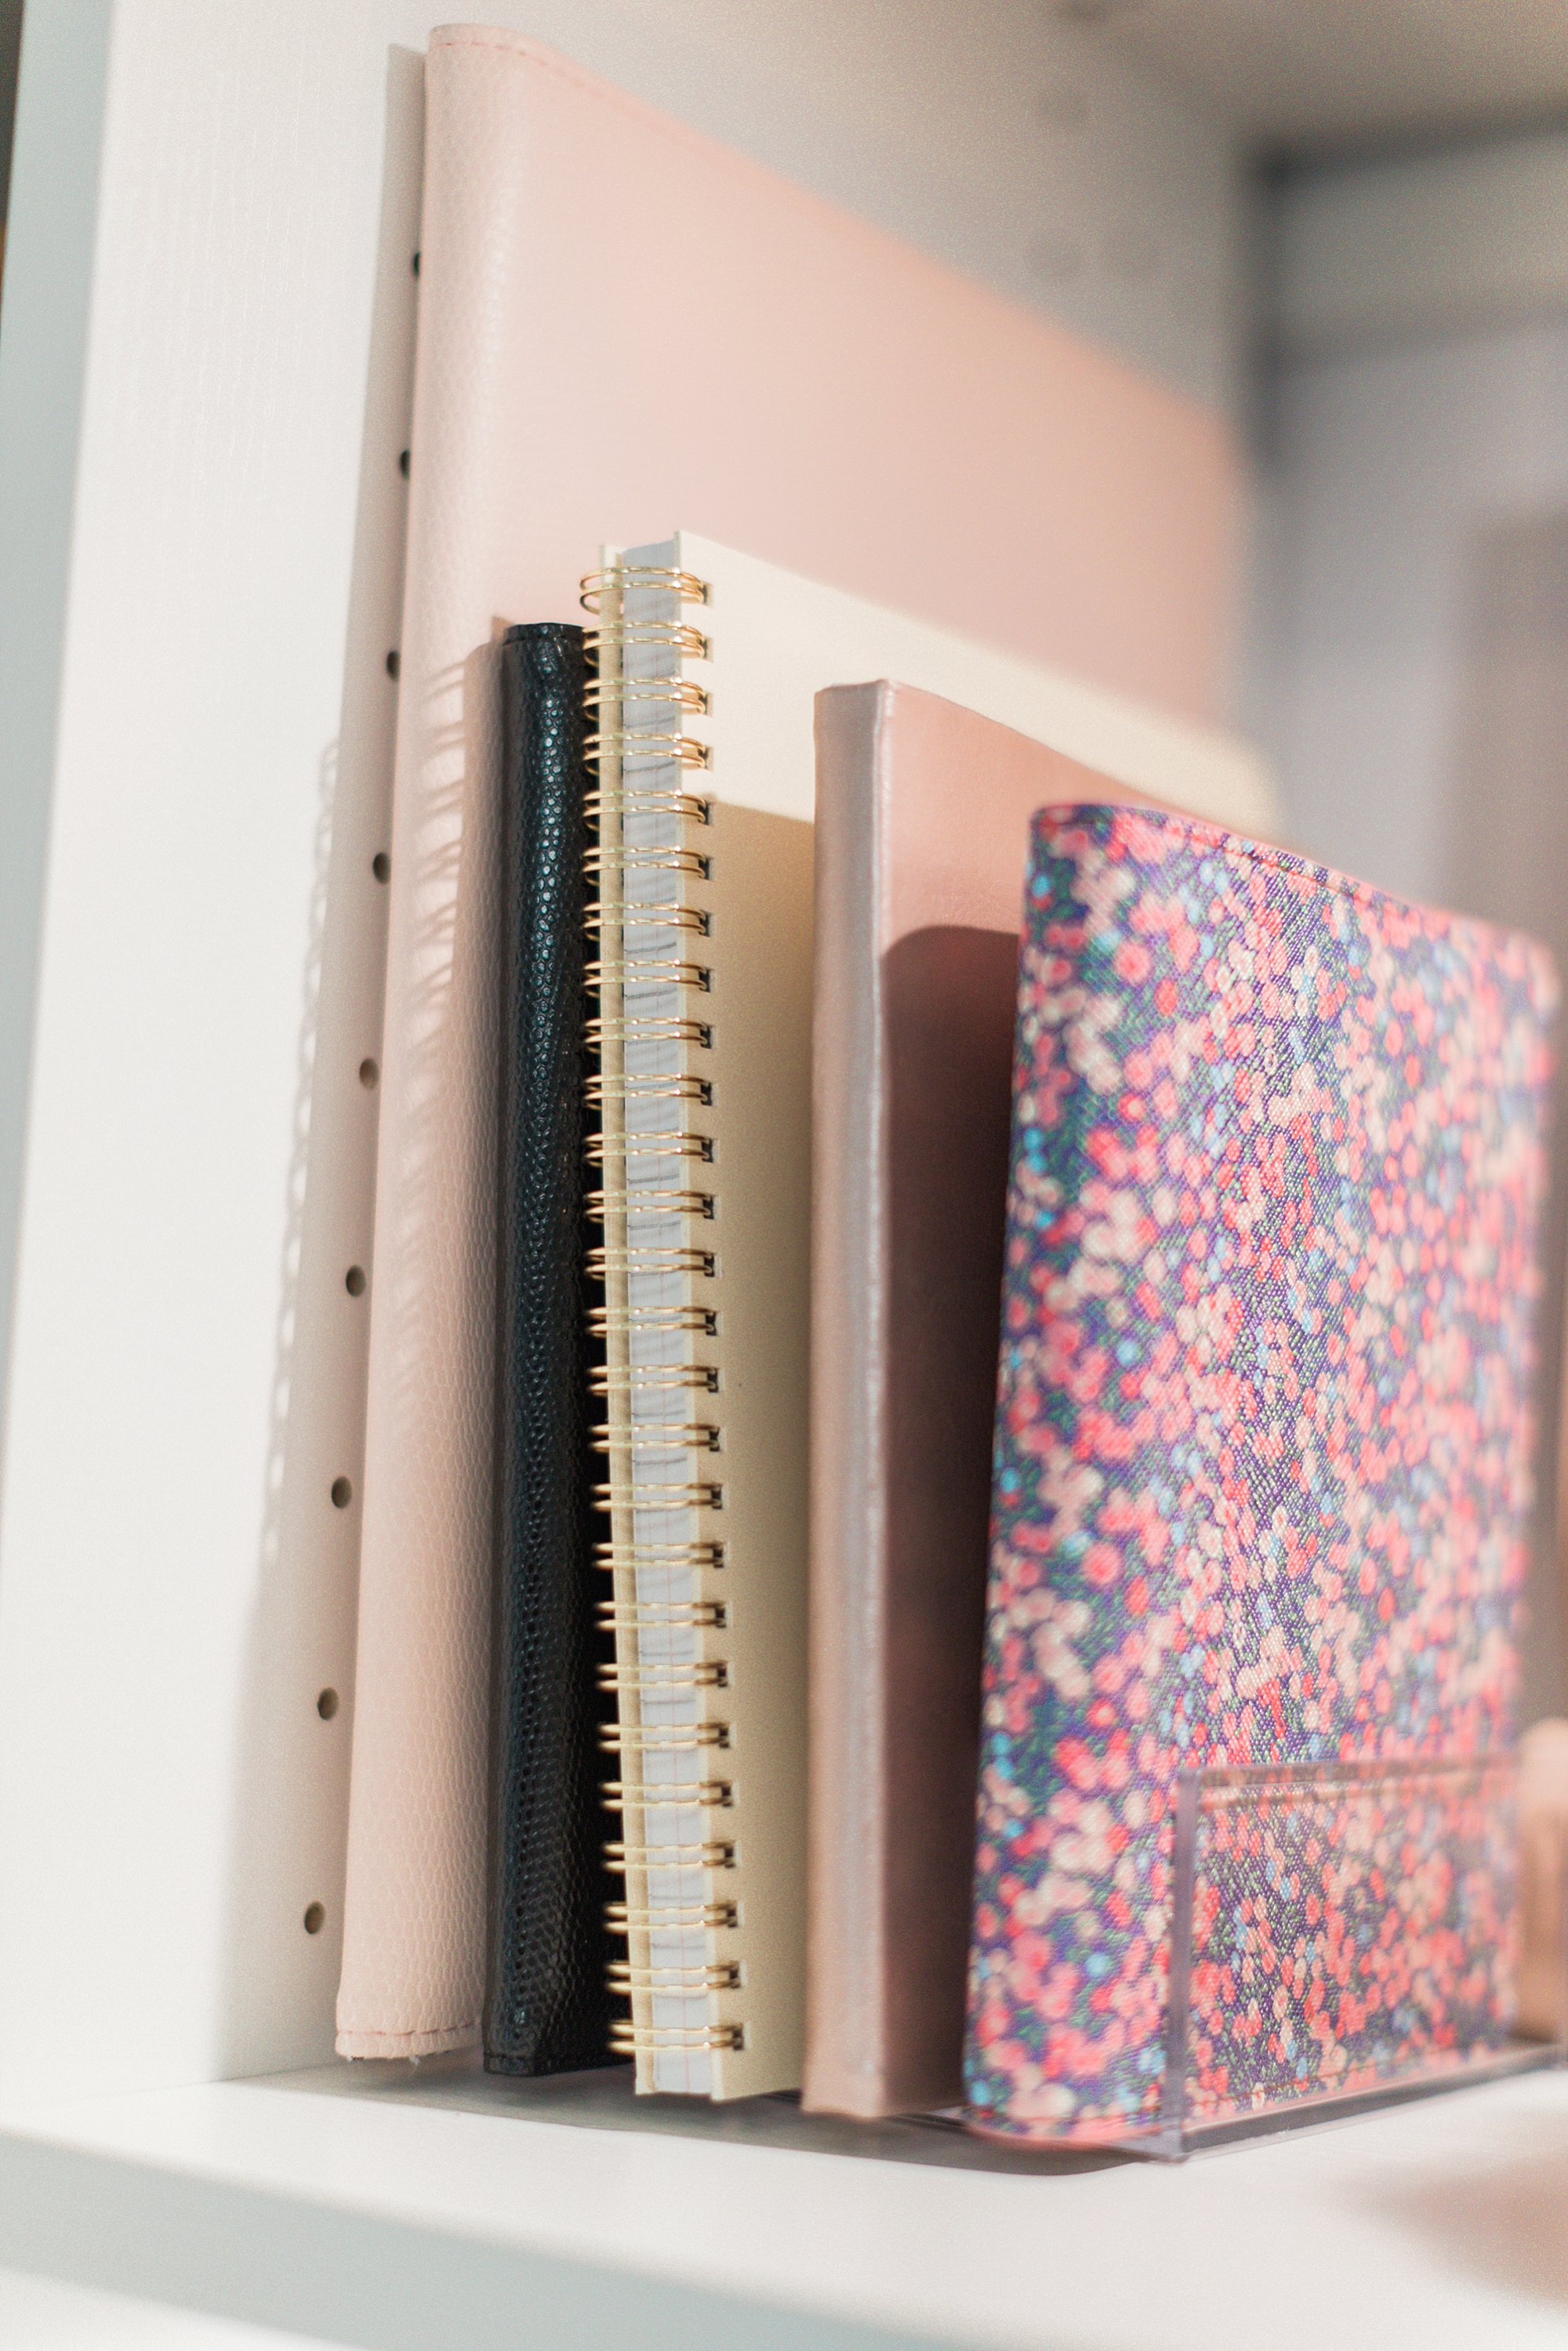 business notebooks on hand for meetings: final reveal of office closet reveal belonging to photographer blogger Diana Elizabeth in phoenix arizona. created by California closets and with removable buffalo check wallpaper #office #closet #wallpaper #organization #lensorganization #lensdrawer